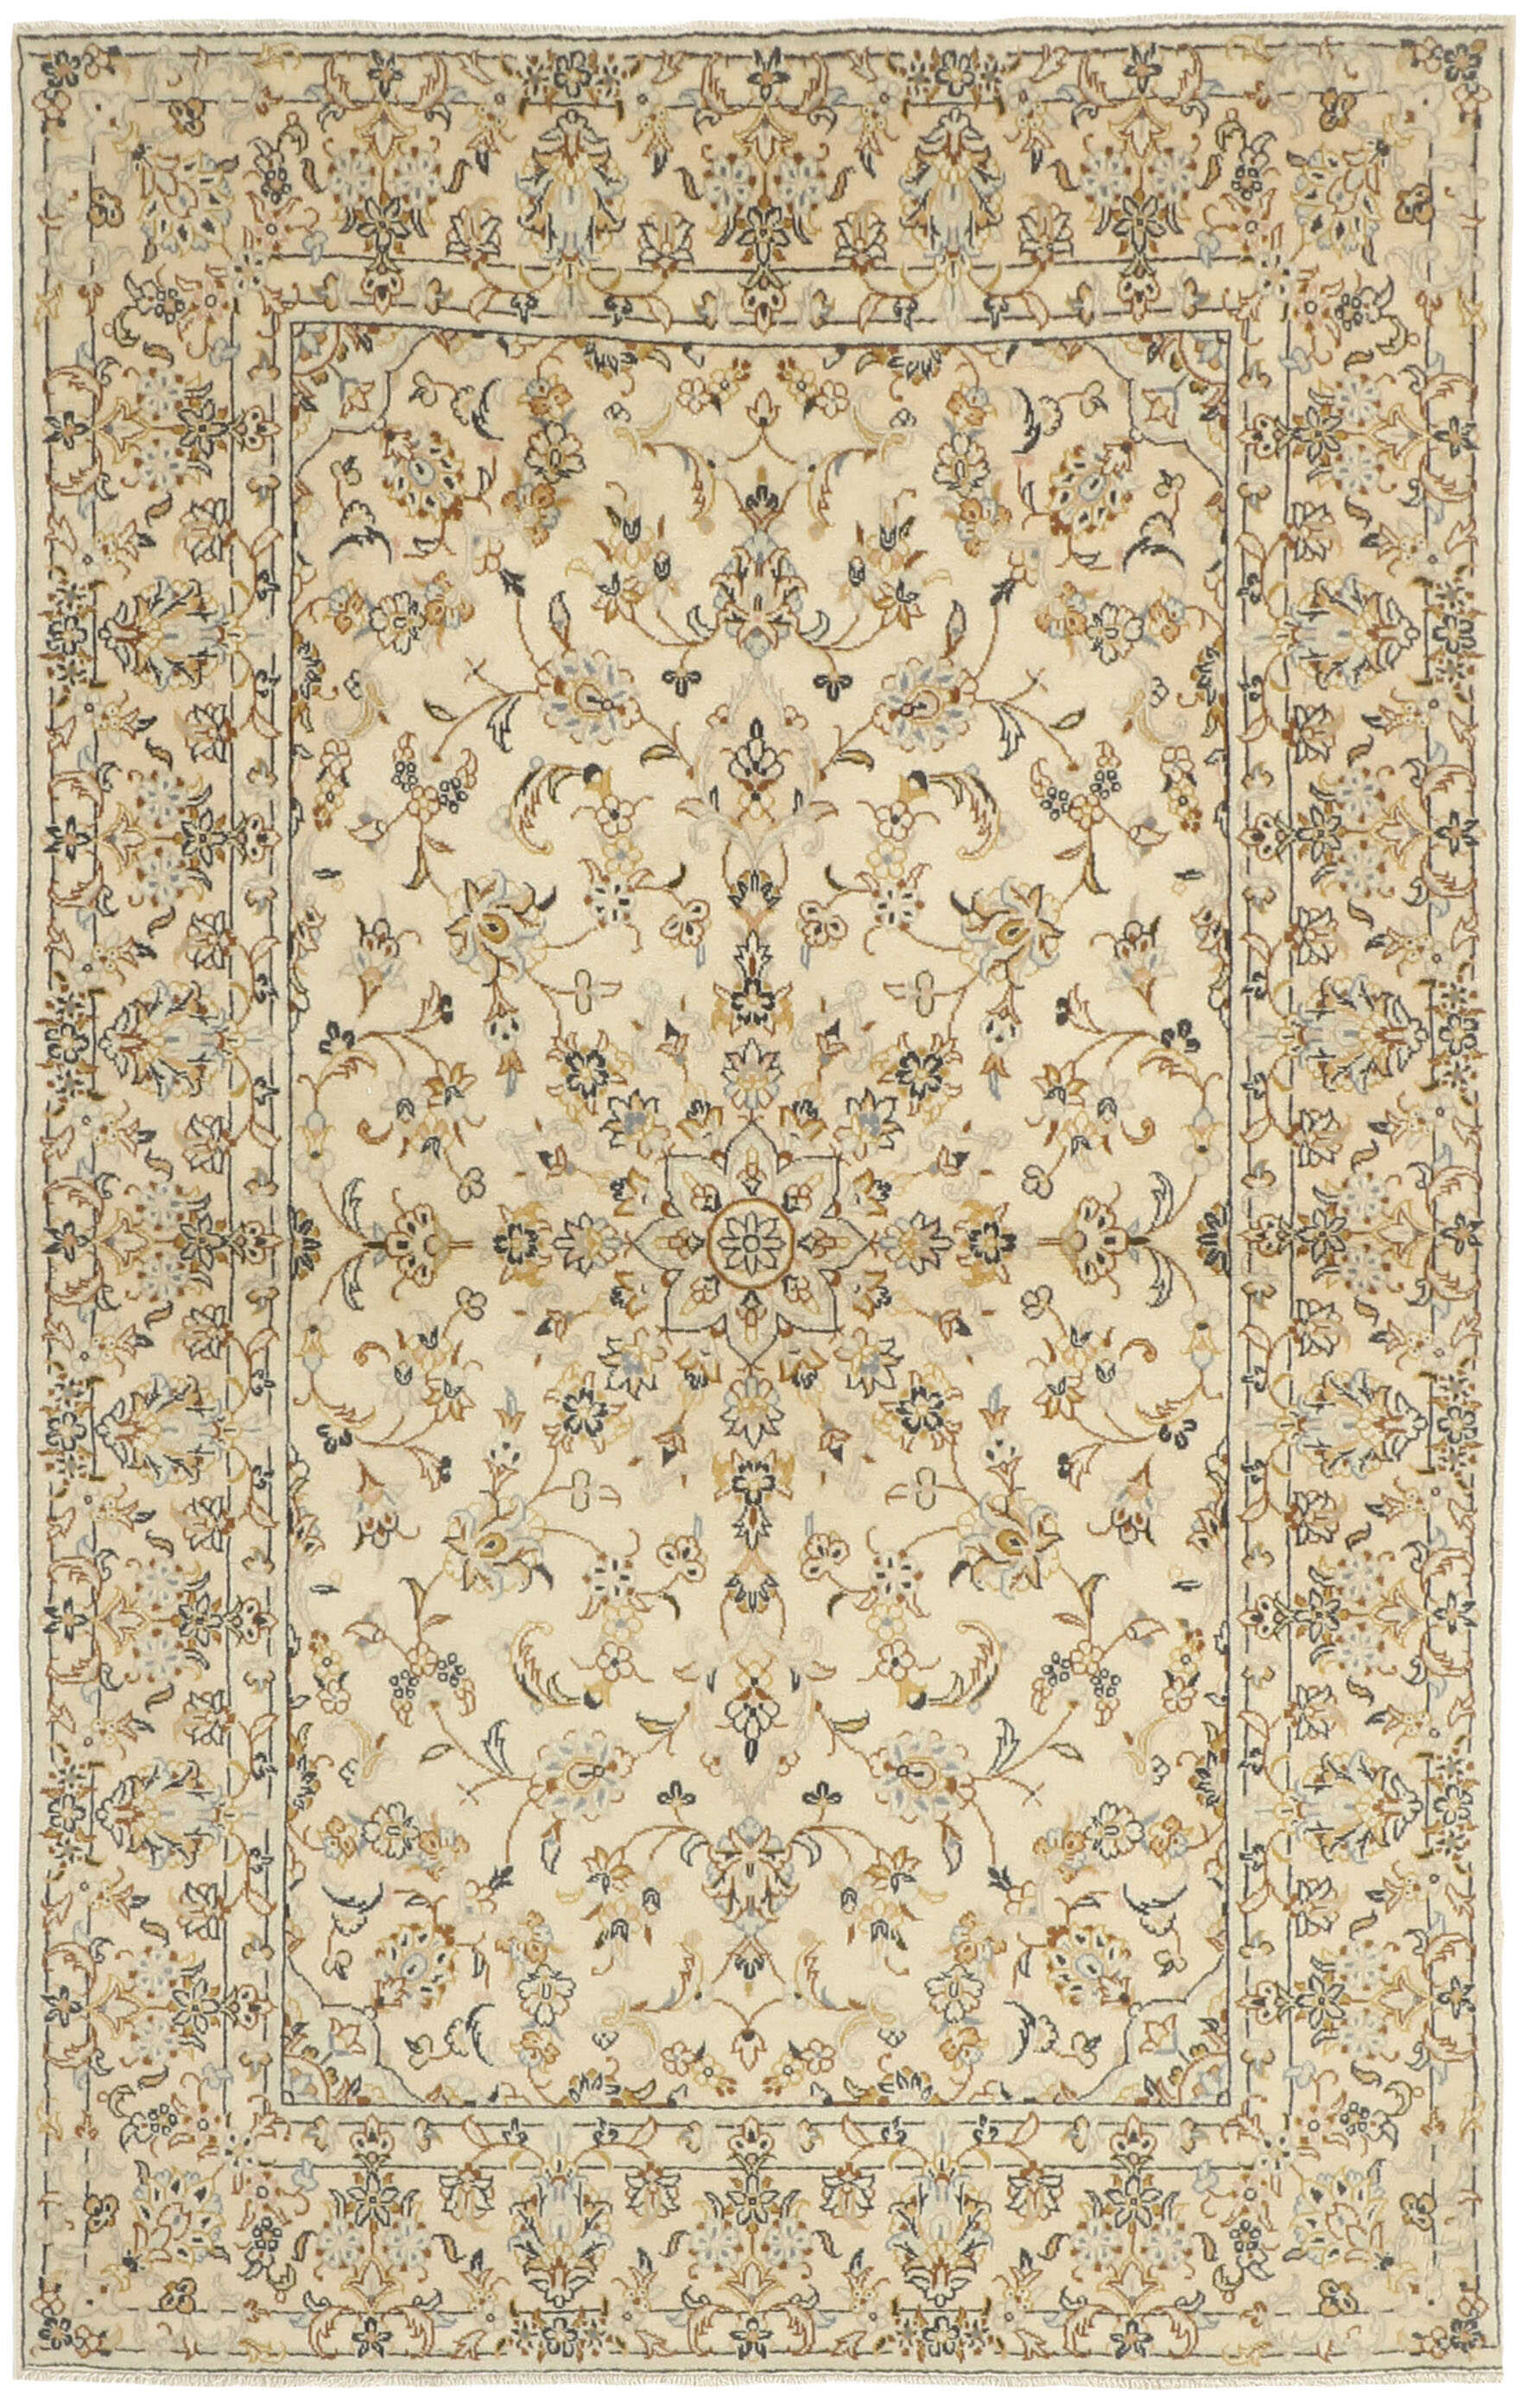 Authentic persian rug with traditional floral design in beige